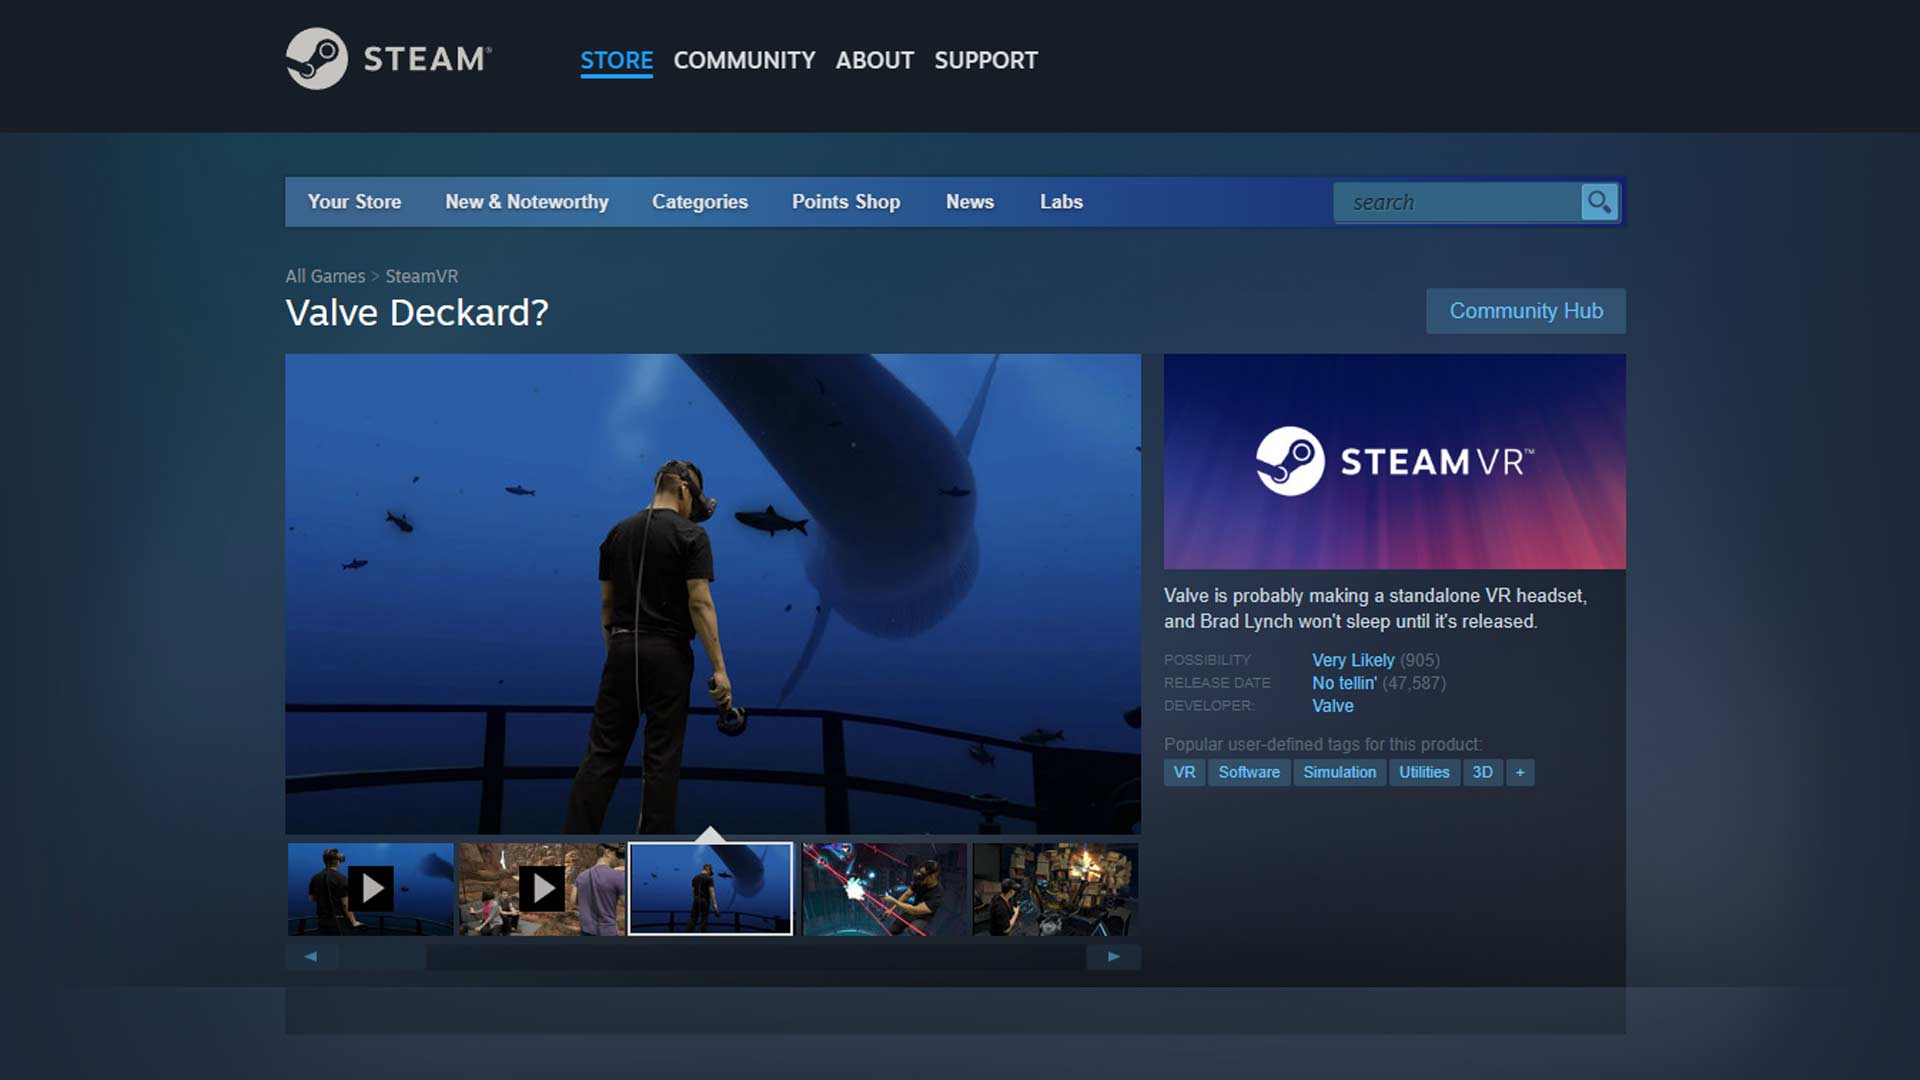 Valve says it will allow all games in its Steam store, no matter